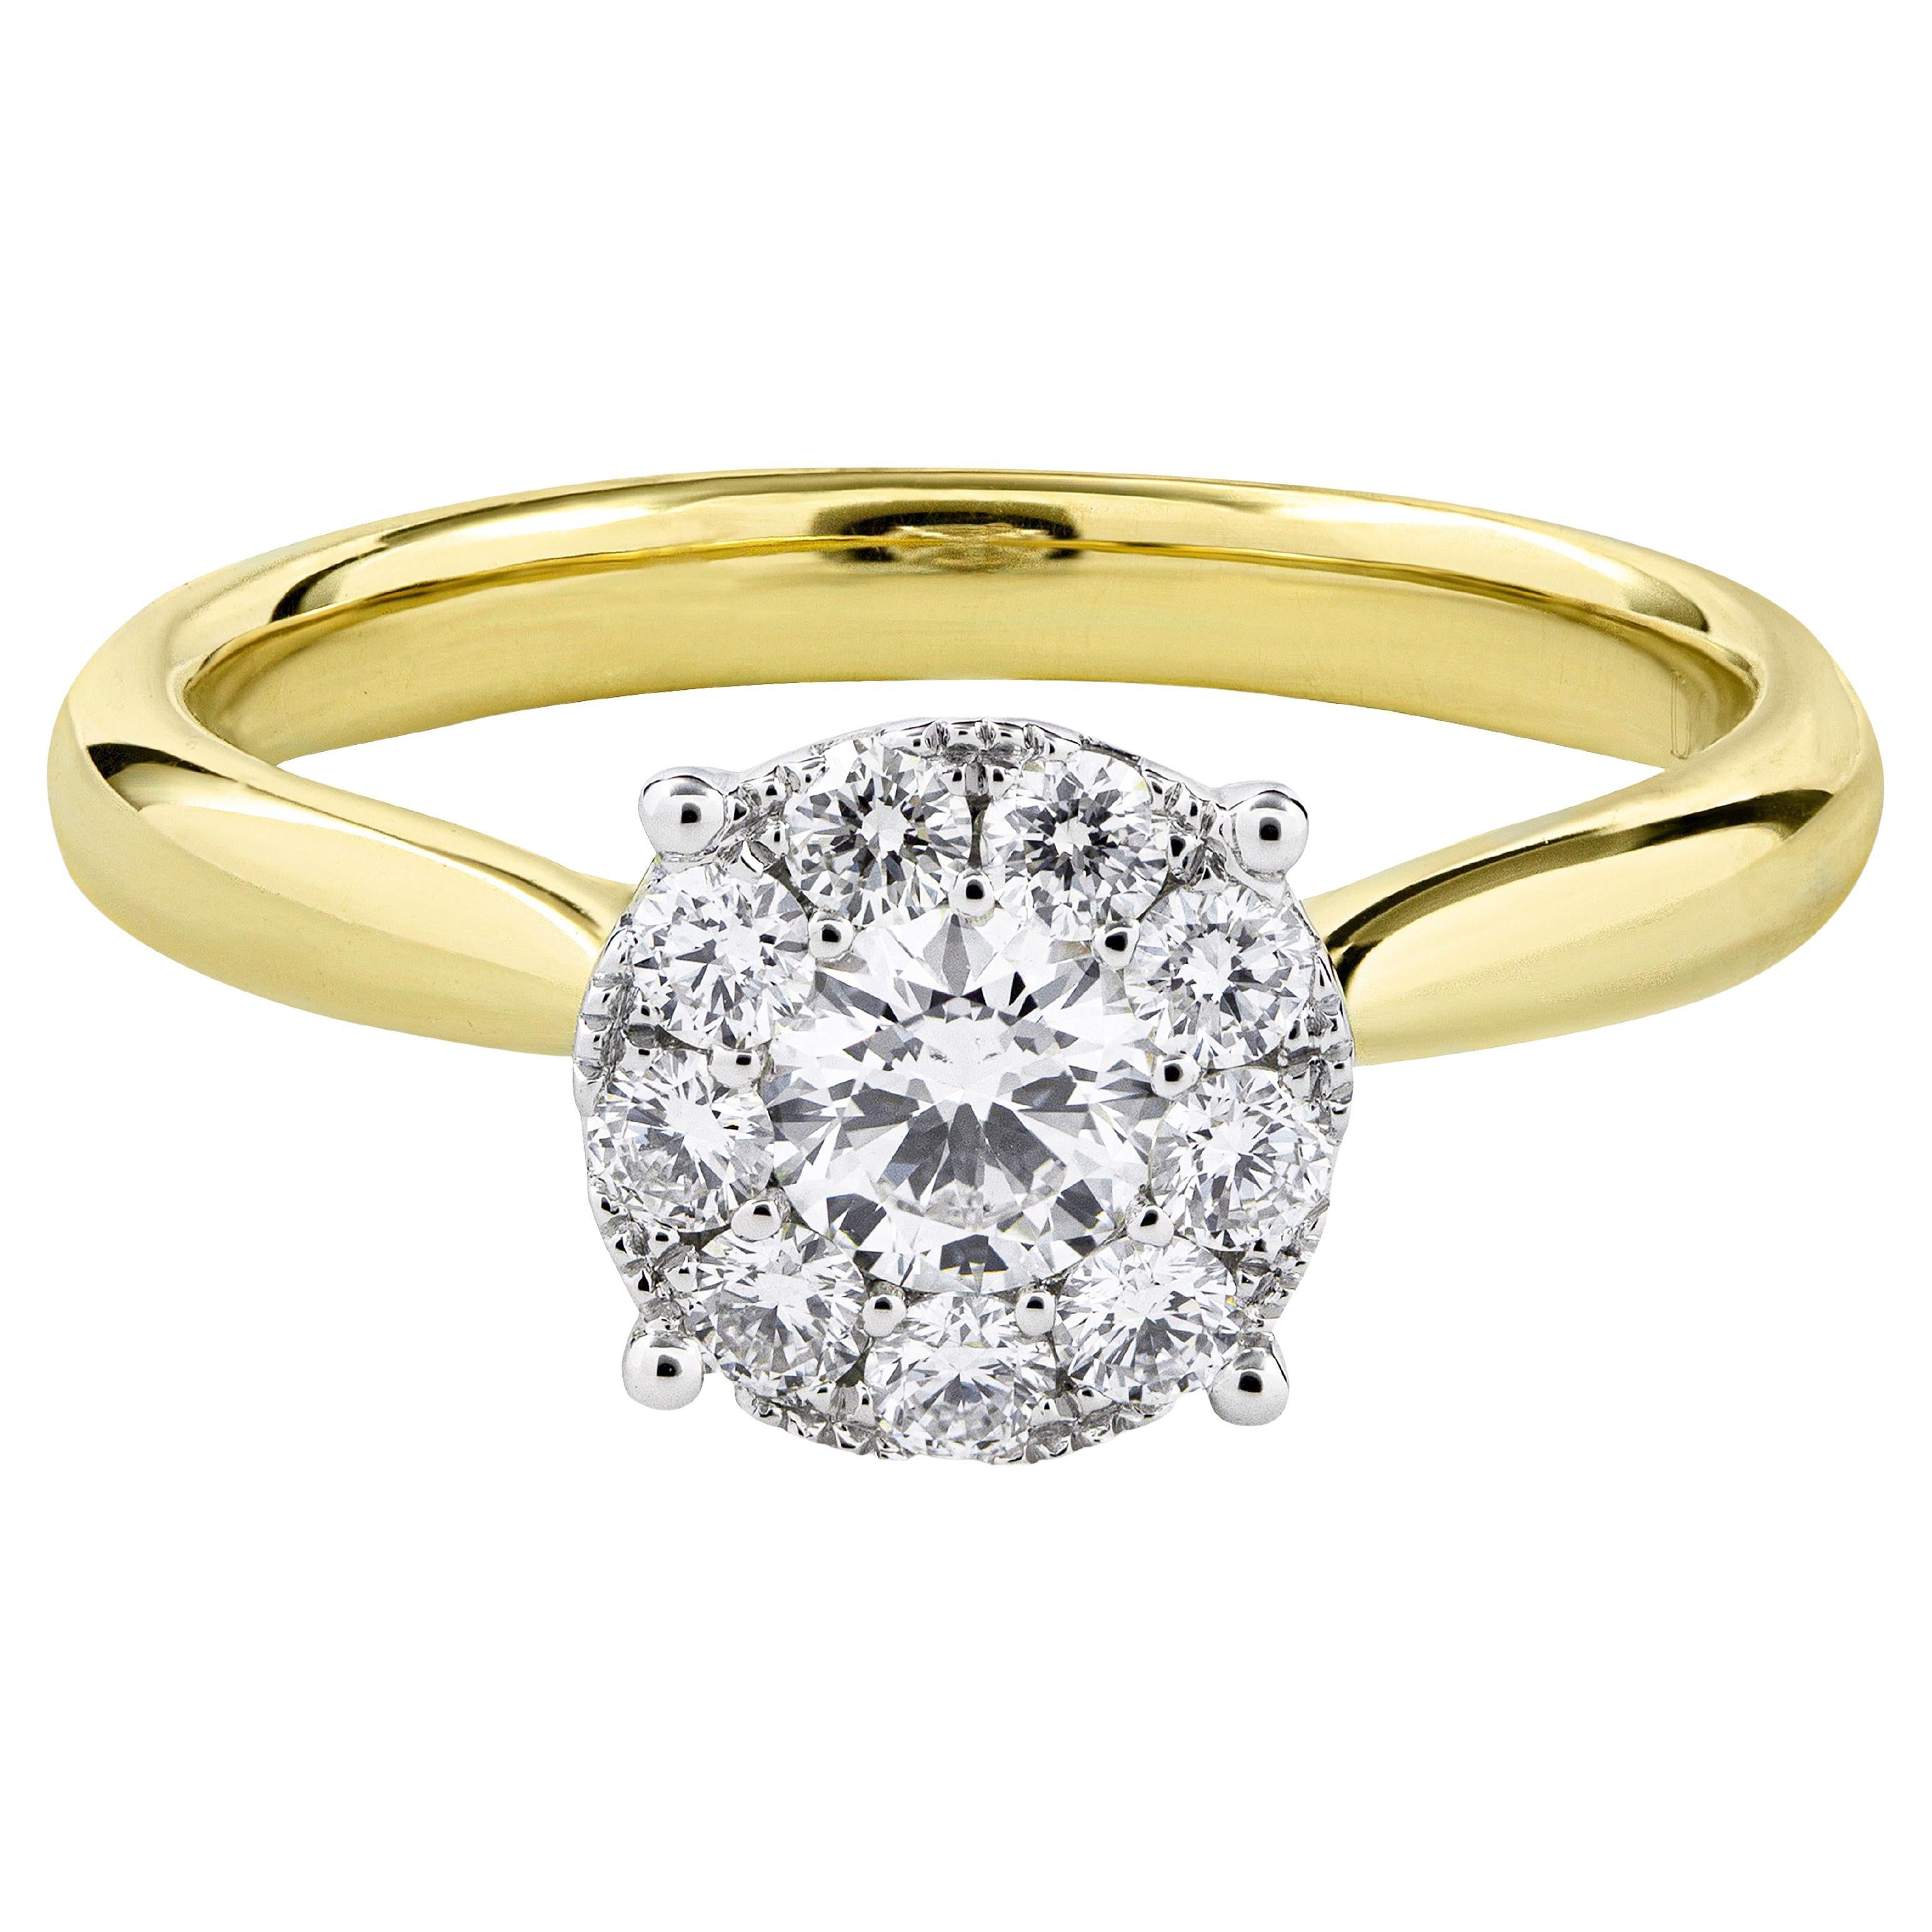 Round Diamond Cluster Engagement Ring in Yellow Gold